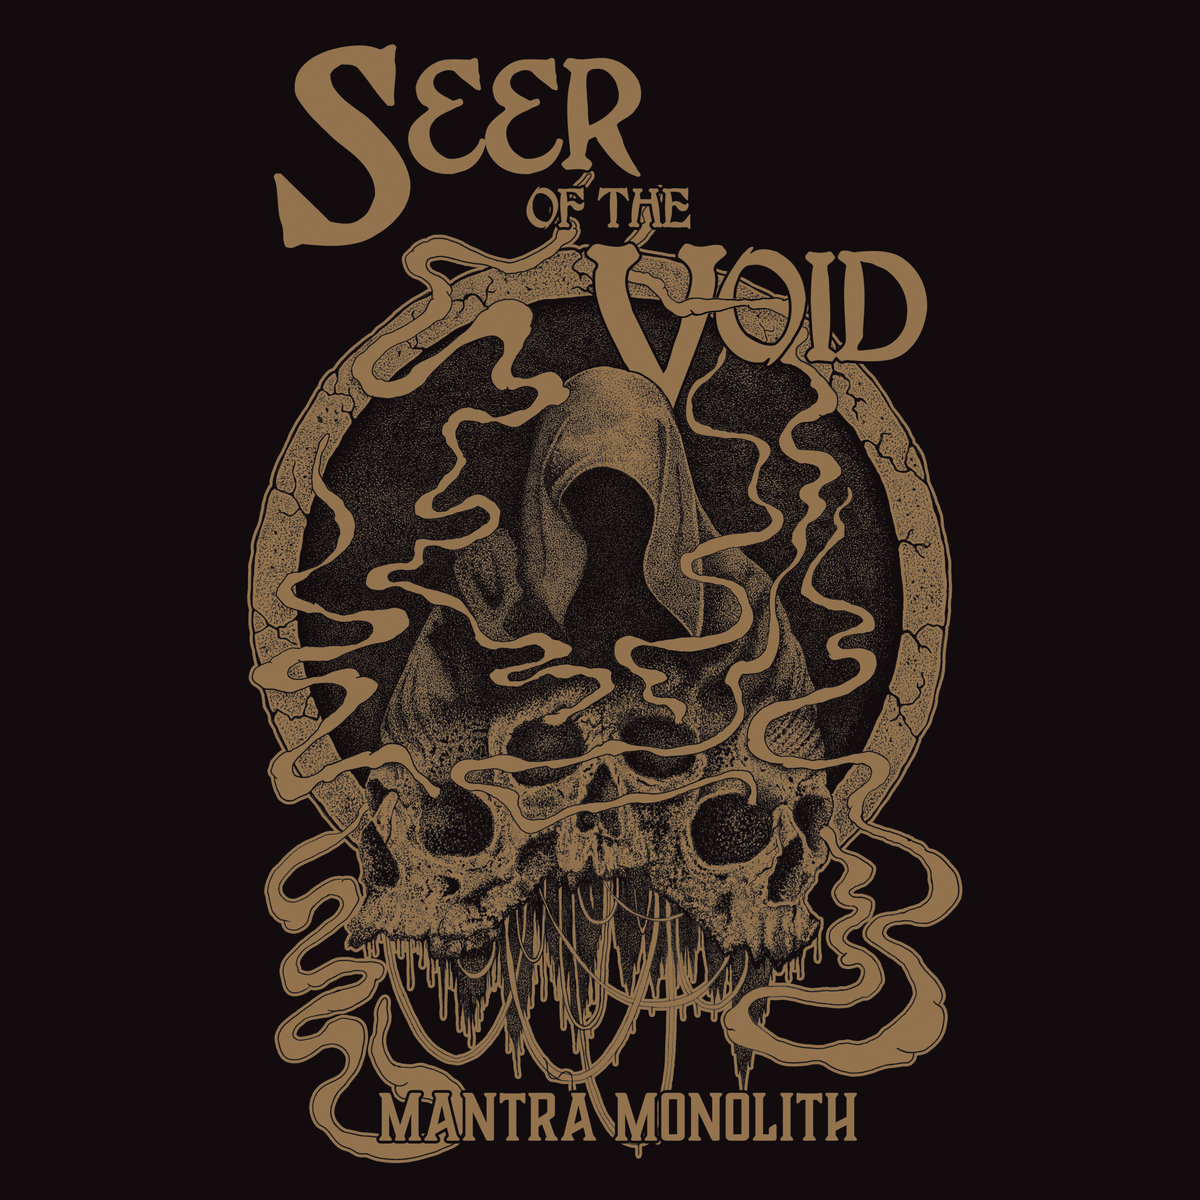 Seer of the Void - "Mantra Monolith" - 2023